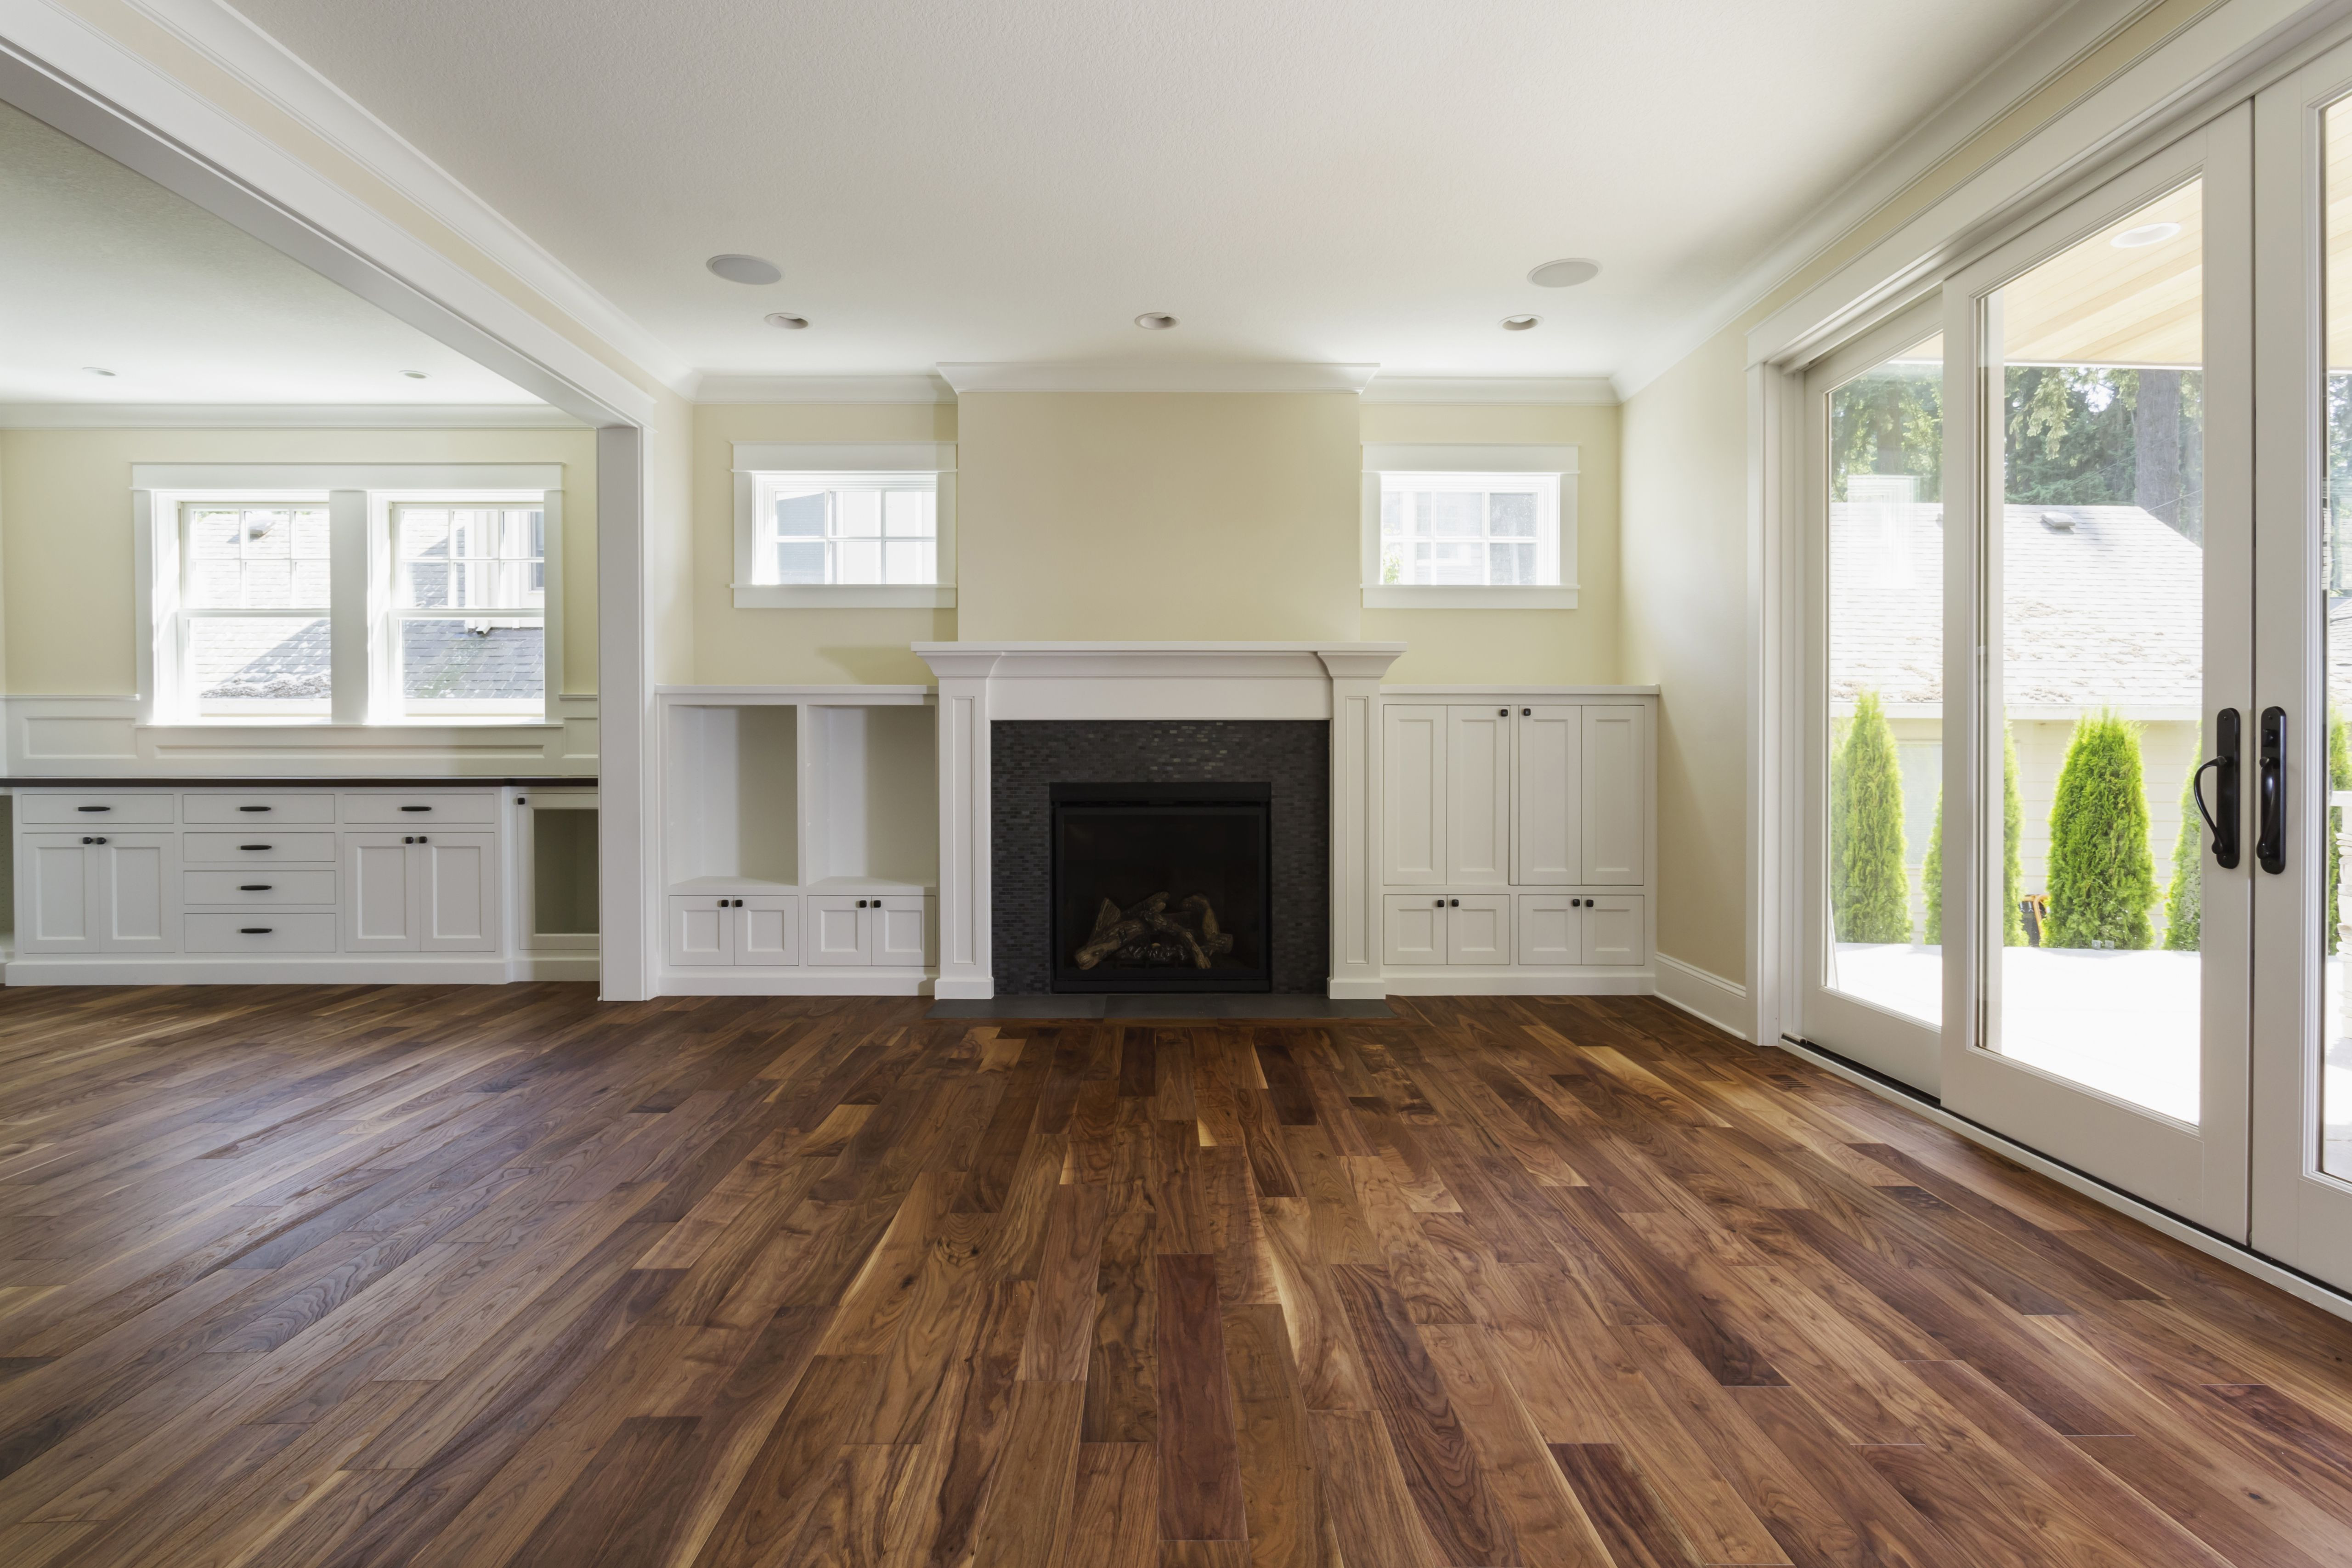 29 Lovable Ceramic Tile Vs Hardwood Flooring 2024 free download ceramic tile vs hardwood flooring of the pros and cons of prefinished hardwood flooring inside fireplace and built in shelves in living room 482143011 57bef8e33df78cc16e035397